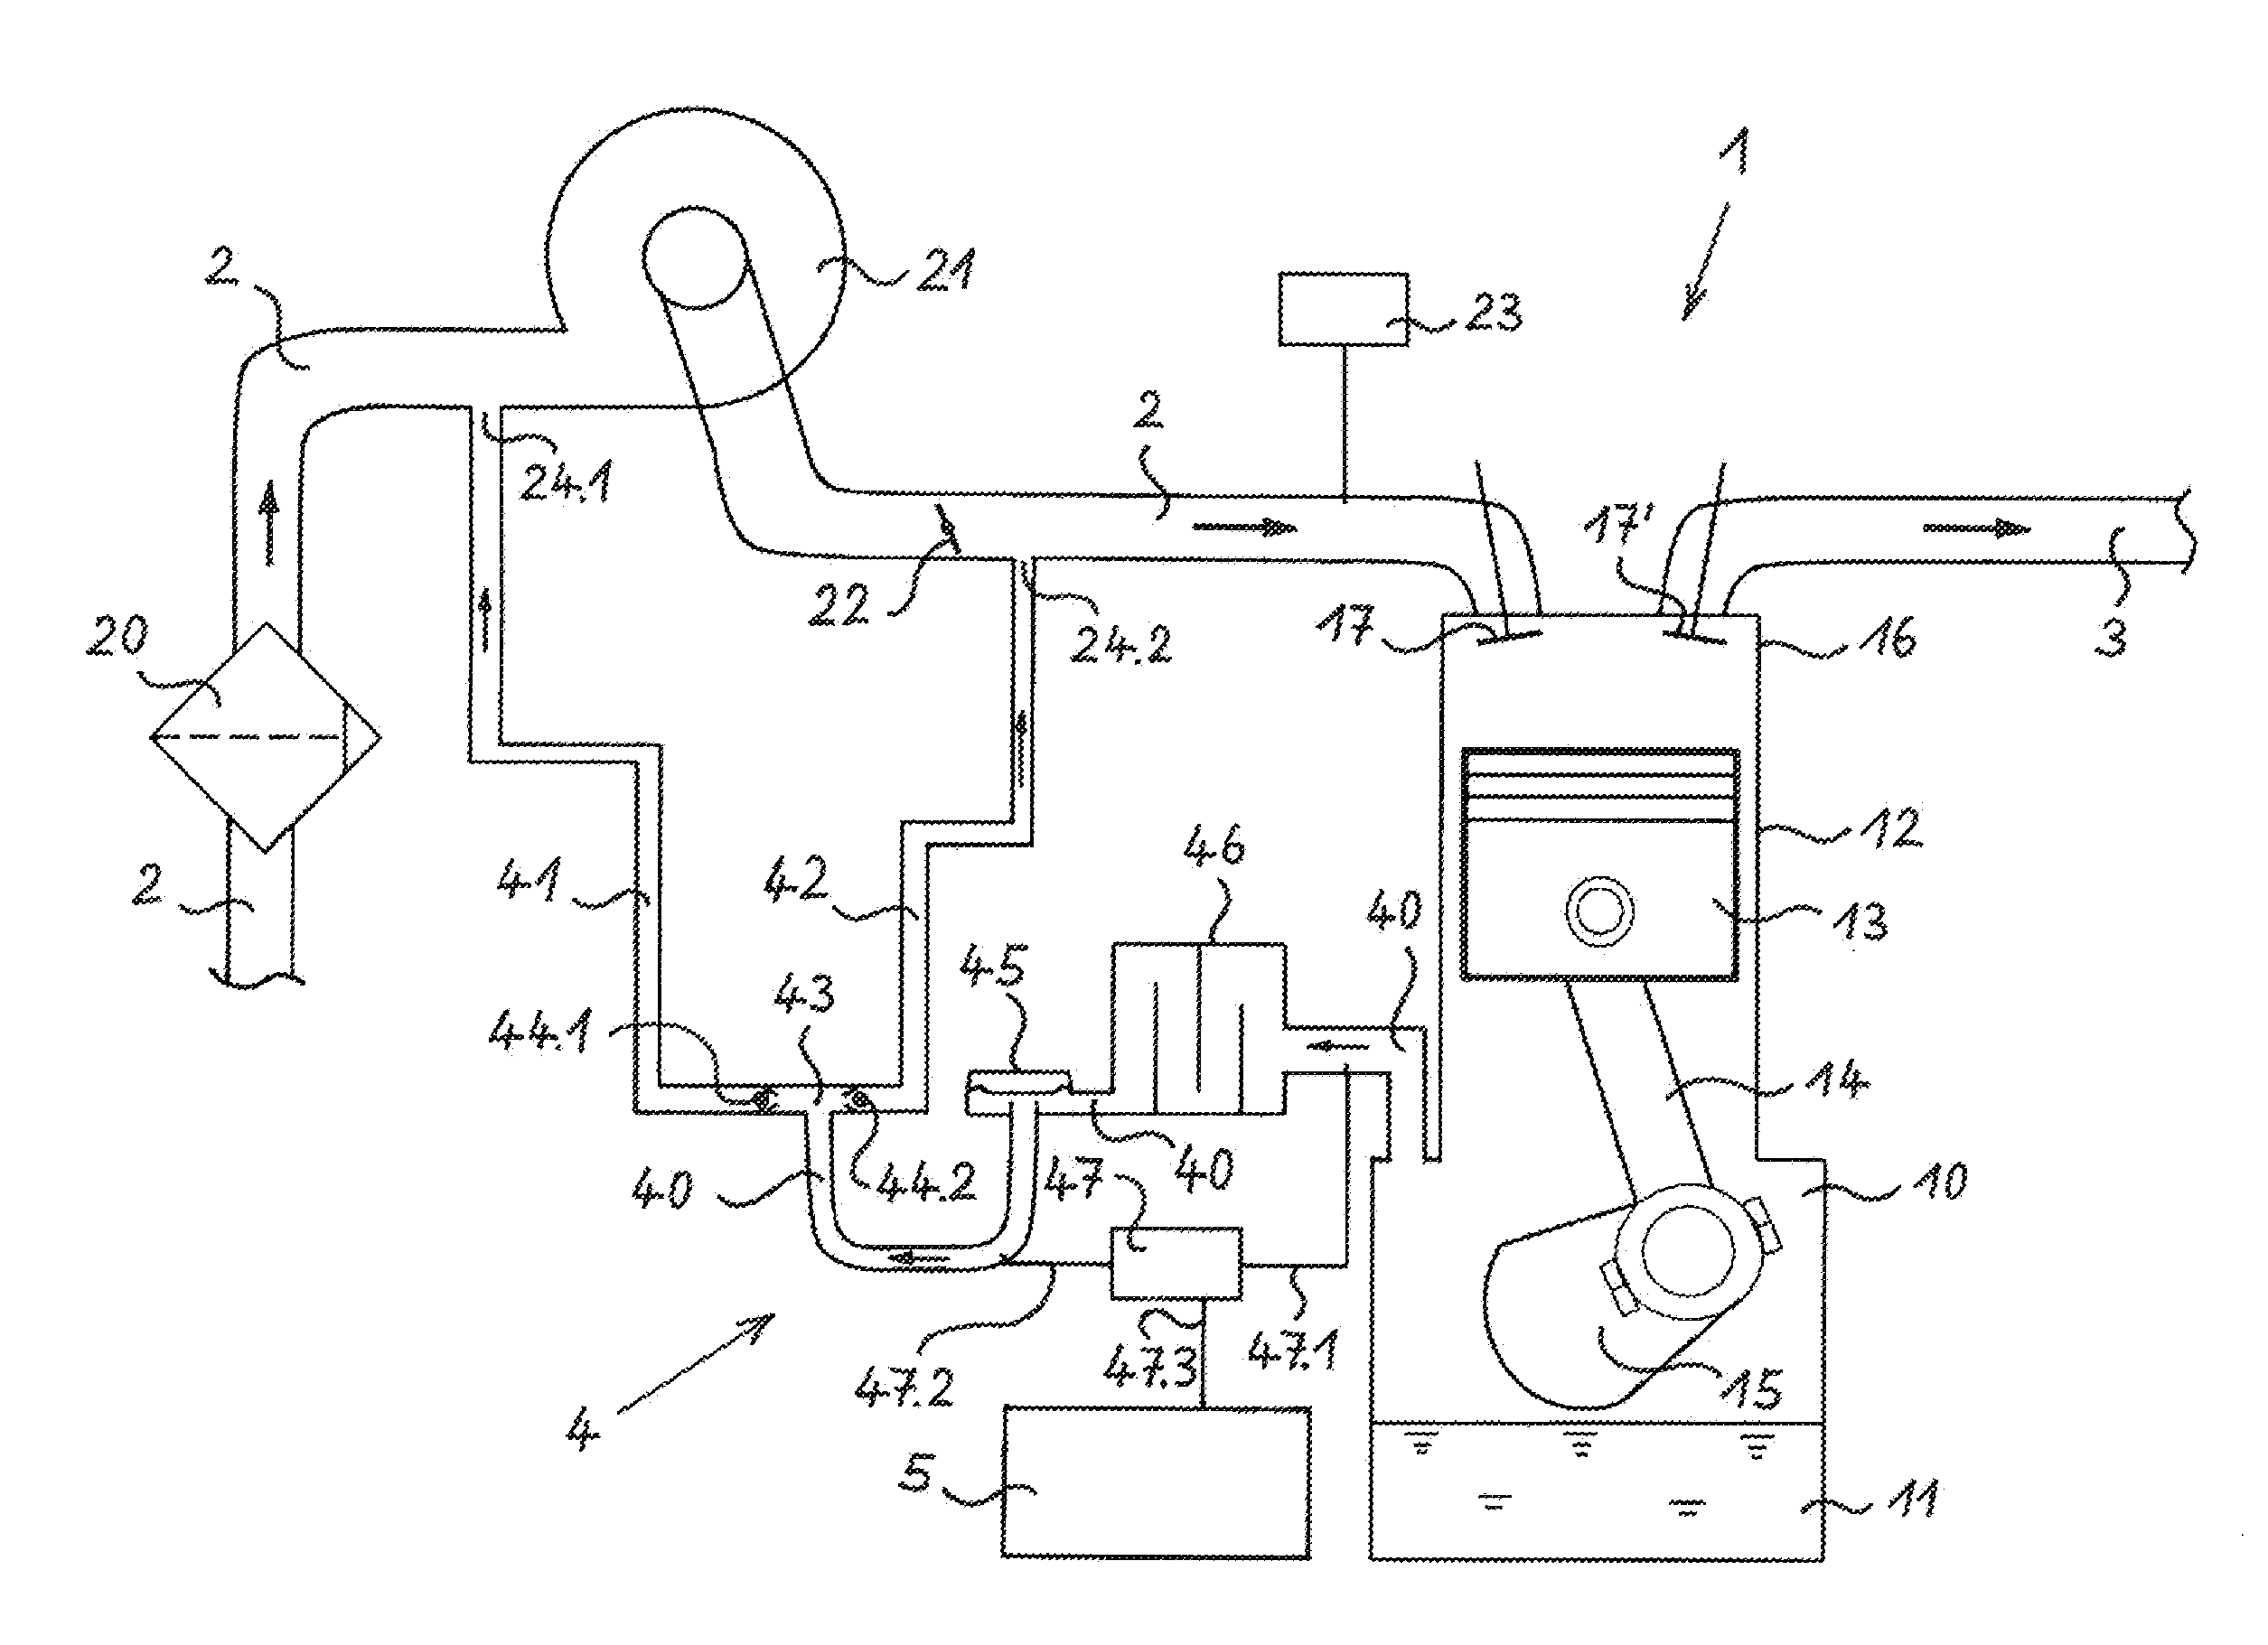 Internal combustion engine having a crankcase ventilation device, and method for monitoring a crankcase ventilation device